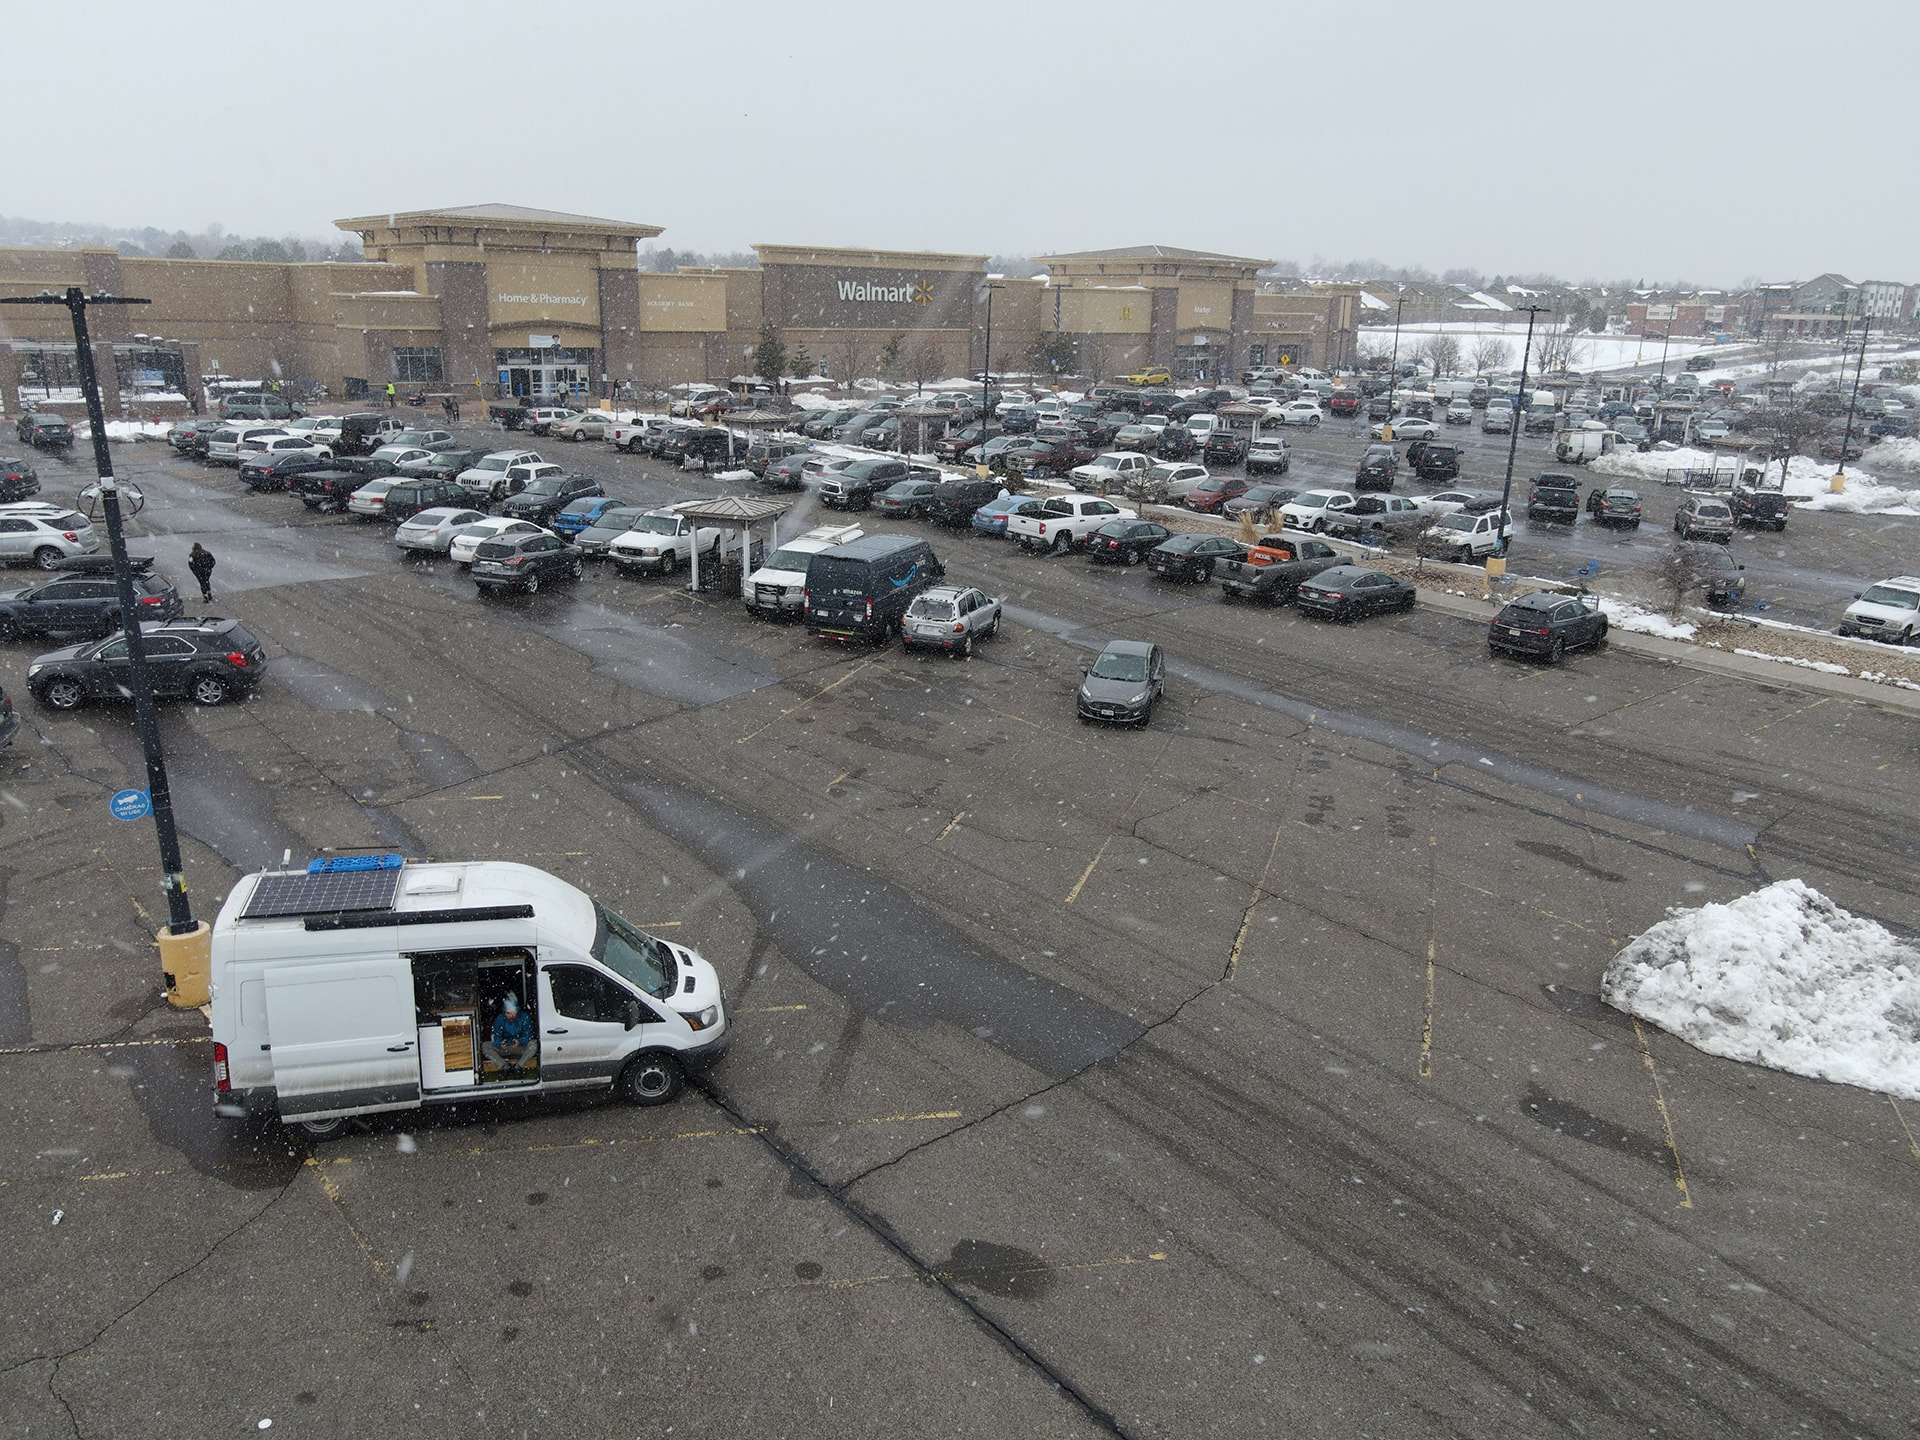 The Walmart parking lot: How a symbol of capitalism became an oasis for  RVers and van dwellers - Roadtrippers